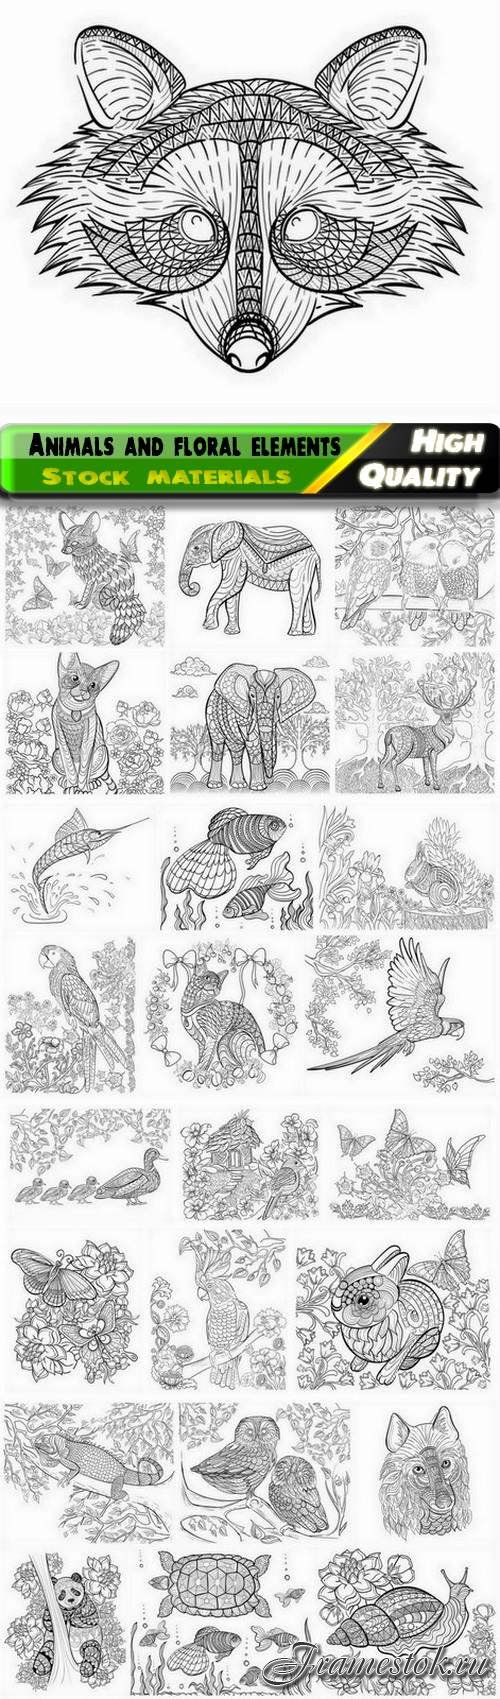 Coloring book with animals and floral elements - 25 Eps